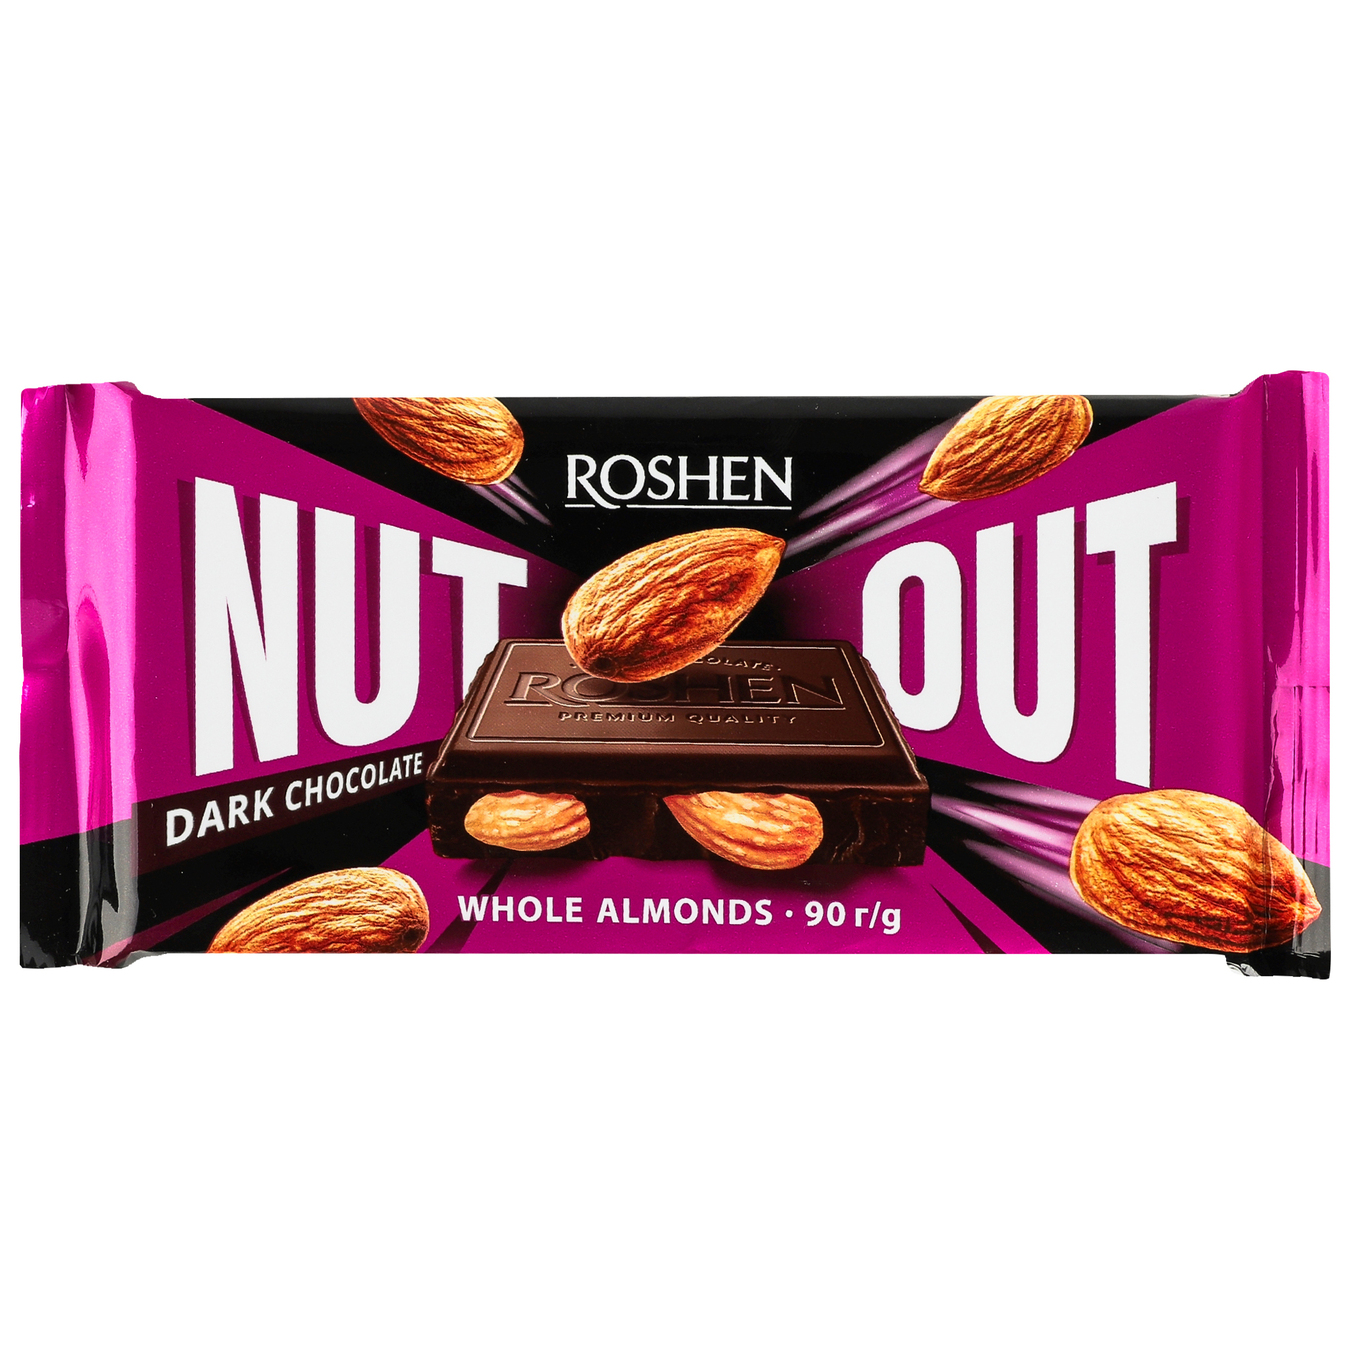 Roshen Nut black chocolate with whole almonds 90g